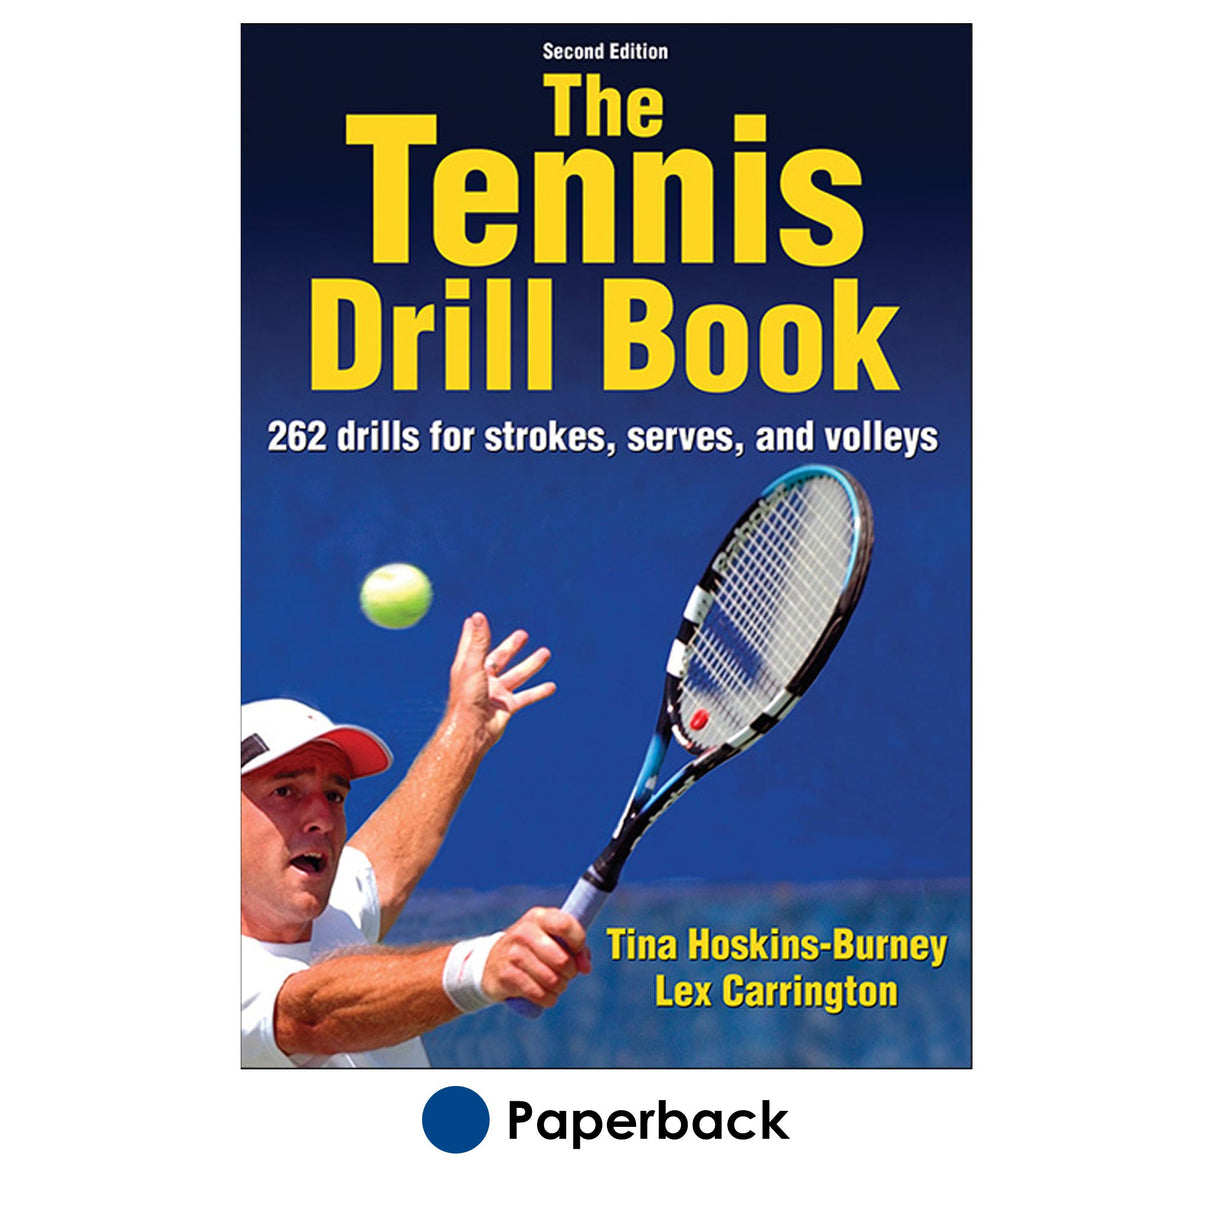 Tennis Drill Book-2nd Edition, The